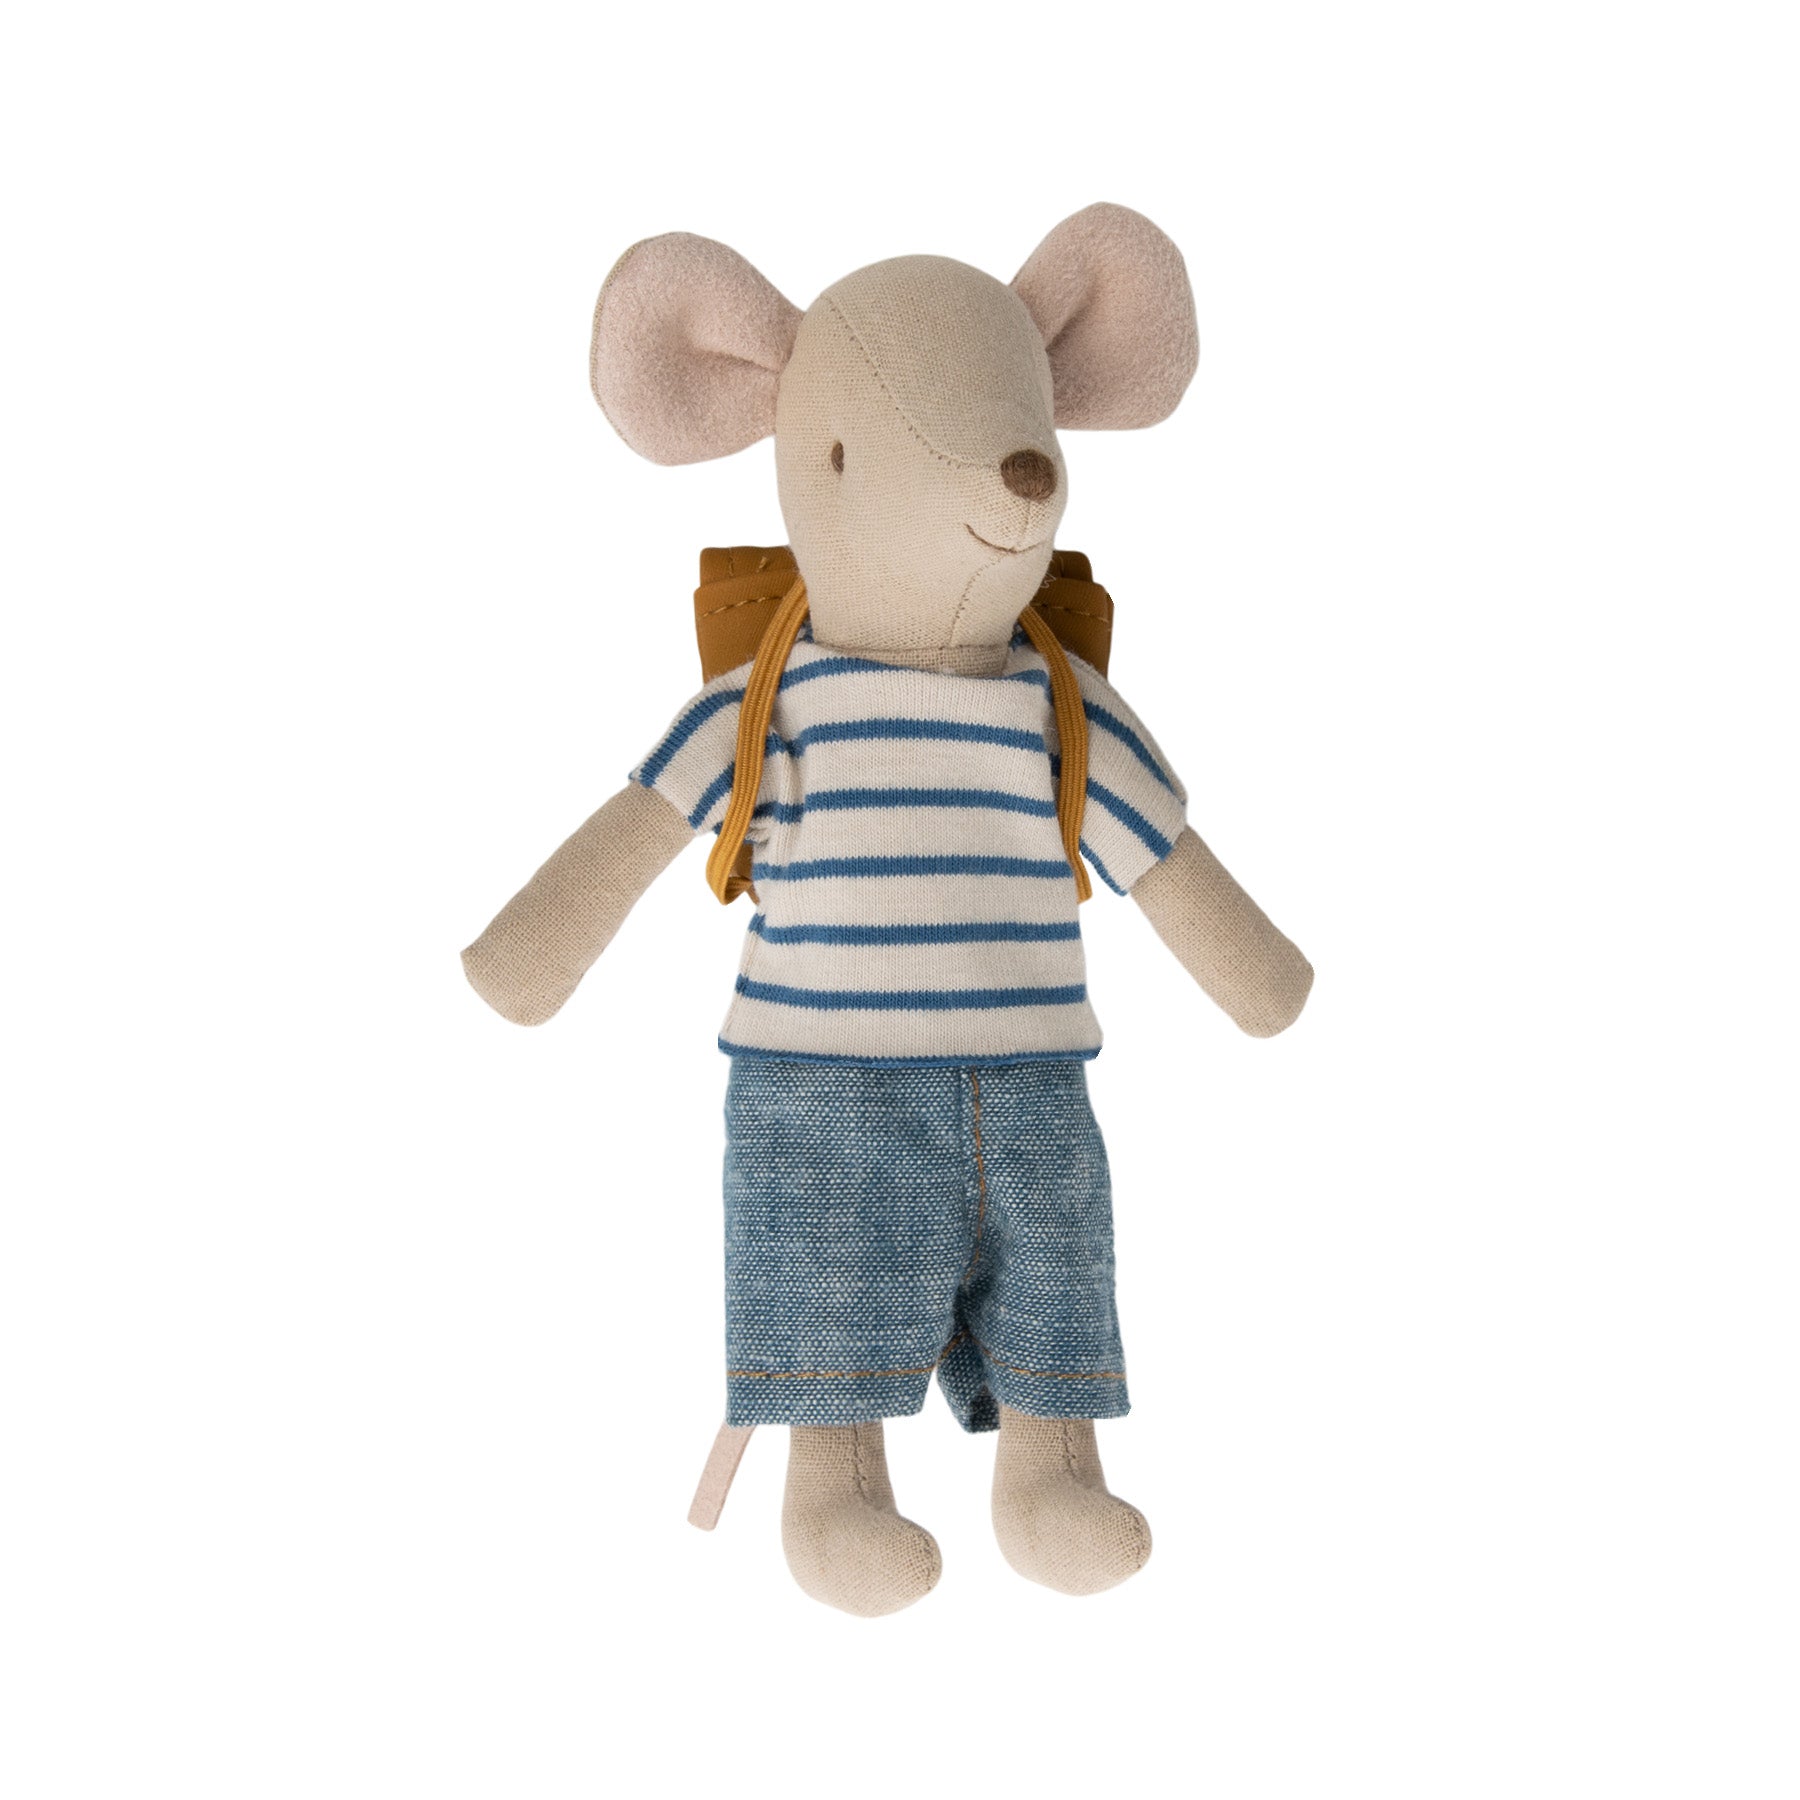 big brother tricycle mouse has a brown rucksack on his back and is dressed  in a blue and white stripe t-shirt and blue denim shorts